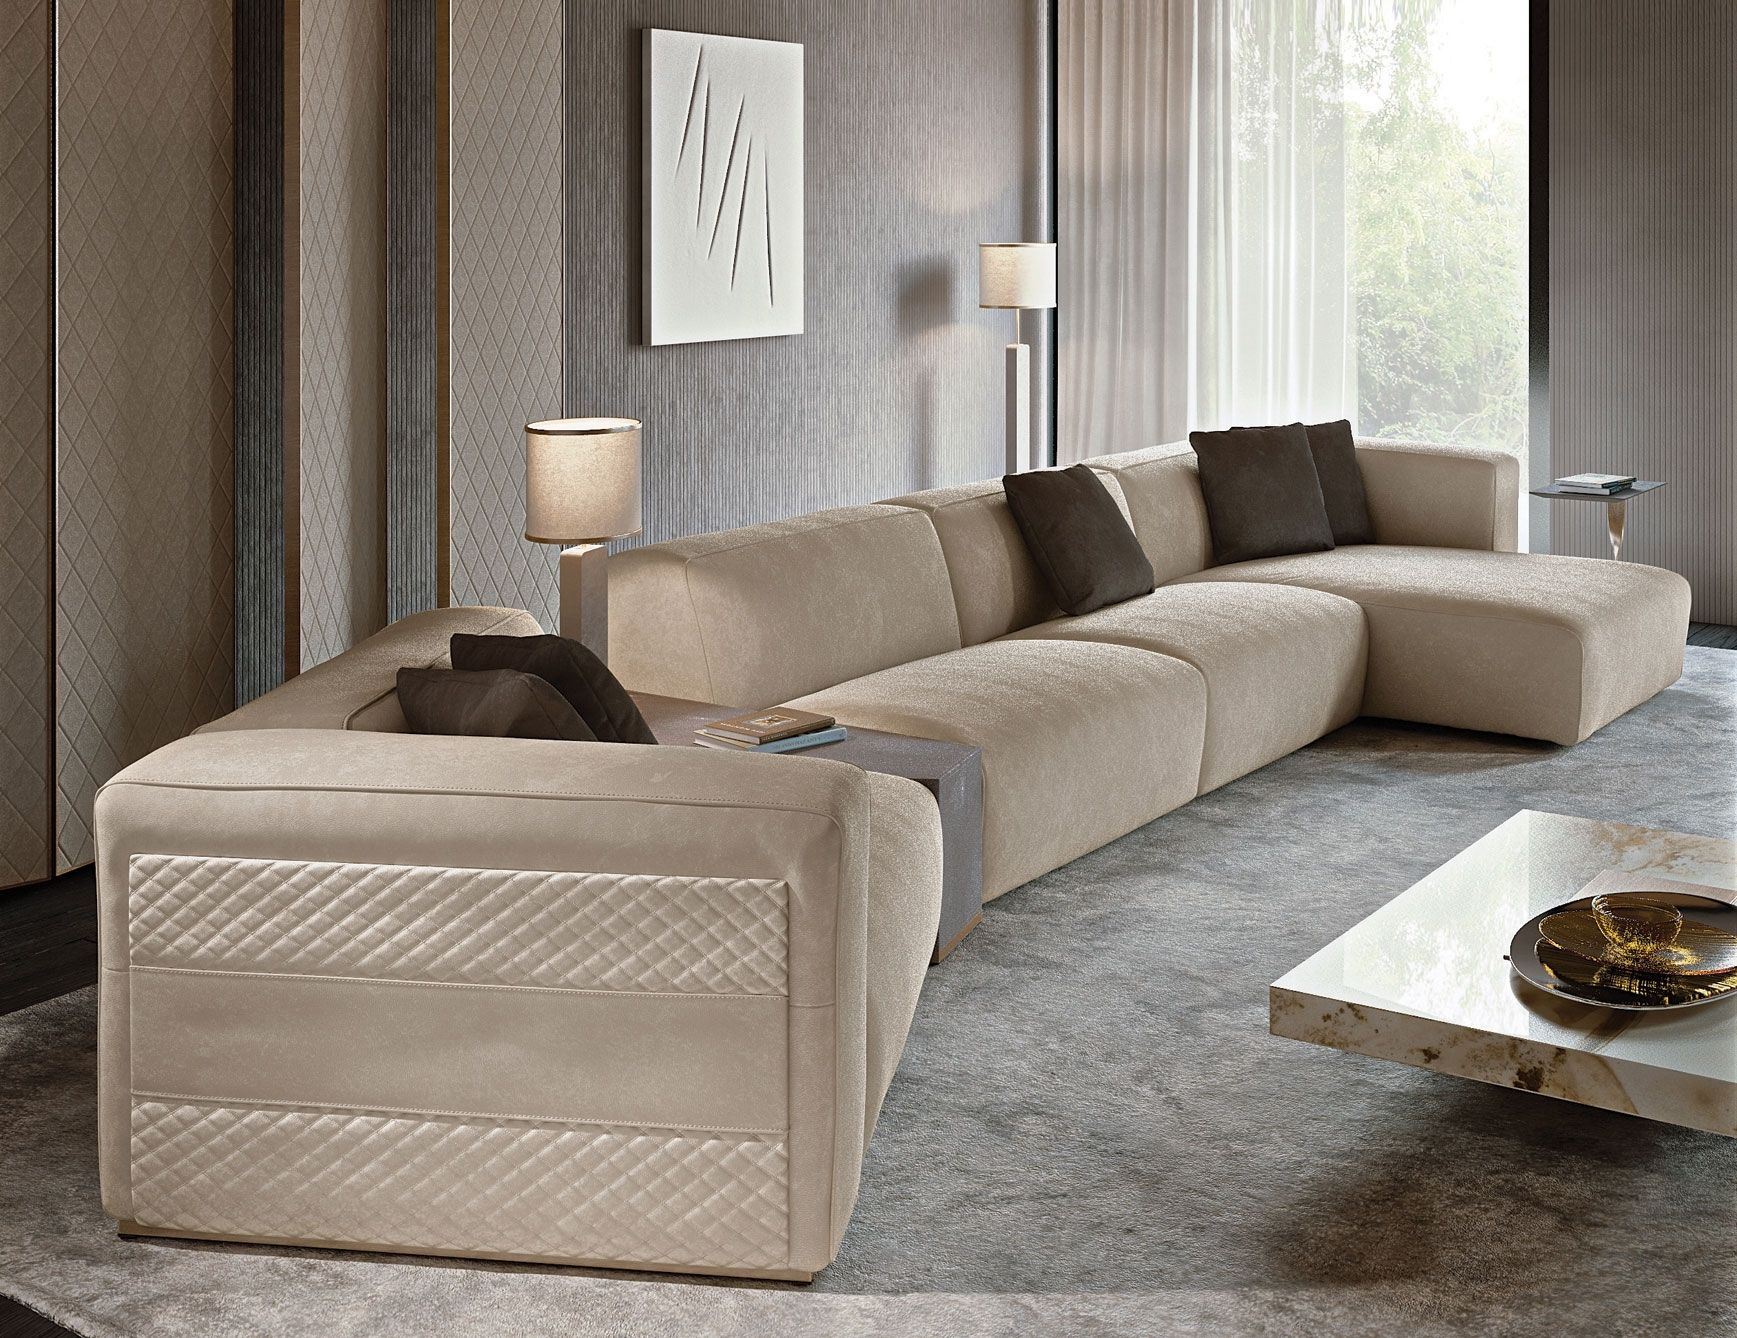 Luxury Sofa Manufacturers Uk | Conceptstructuresllc Within High Quality Sectional Sofas (View 9 of 10)